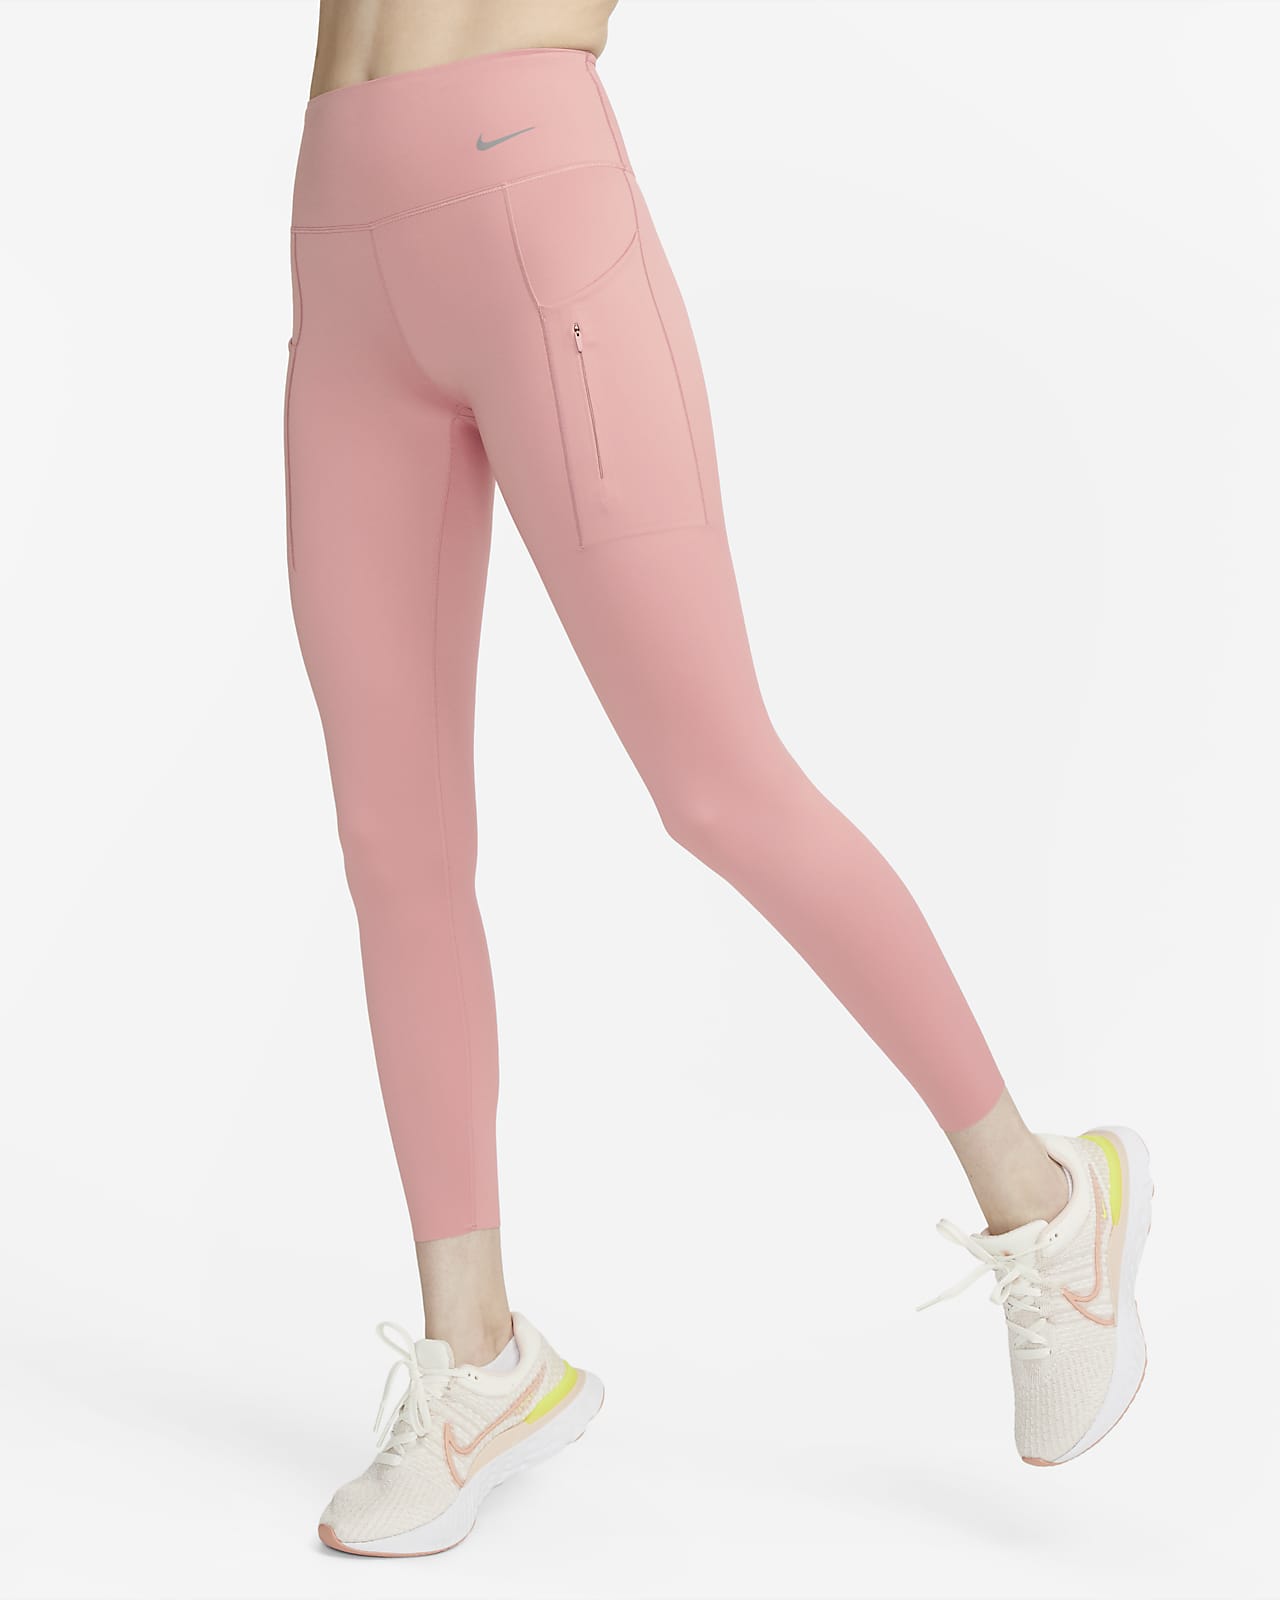 Nike, Dri-FIT Go Women's Firm-Support Mid-Rise 7/8 Leggings with Pockets, Performance Tights